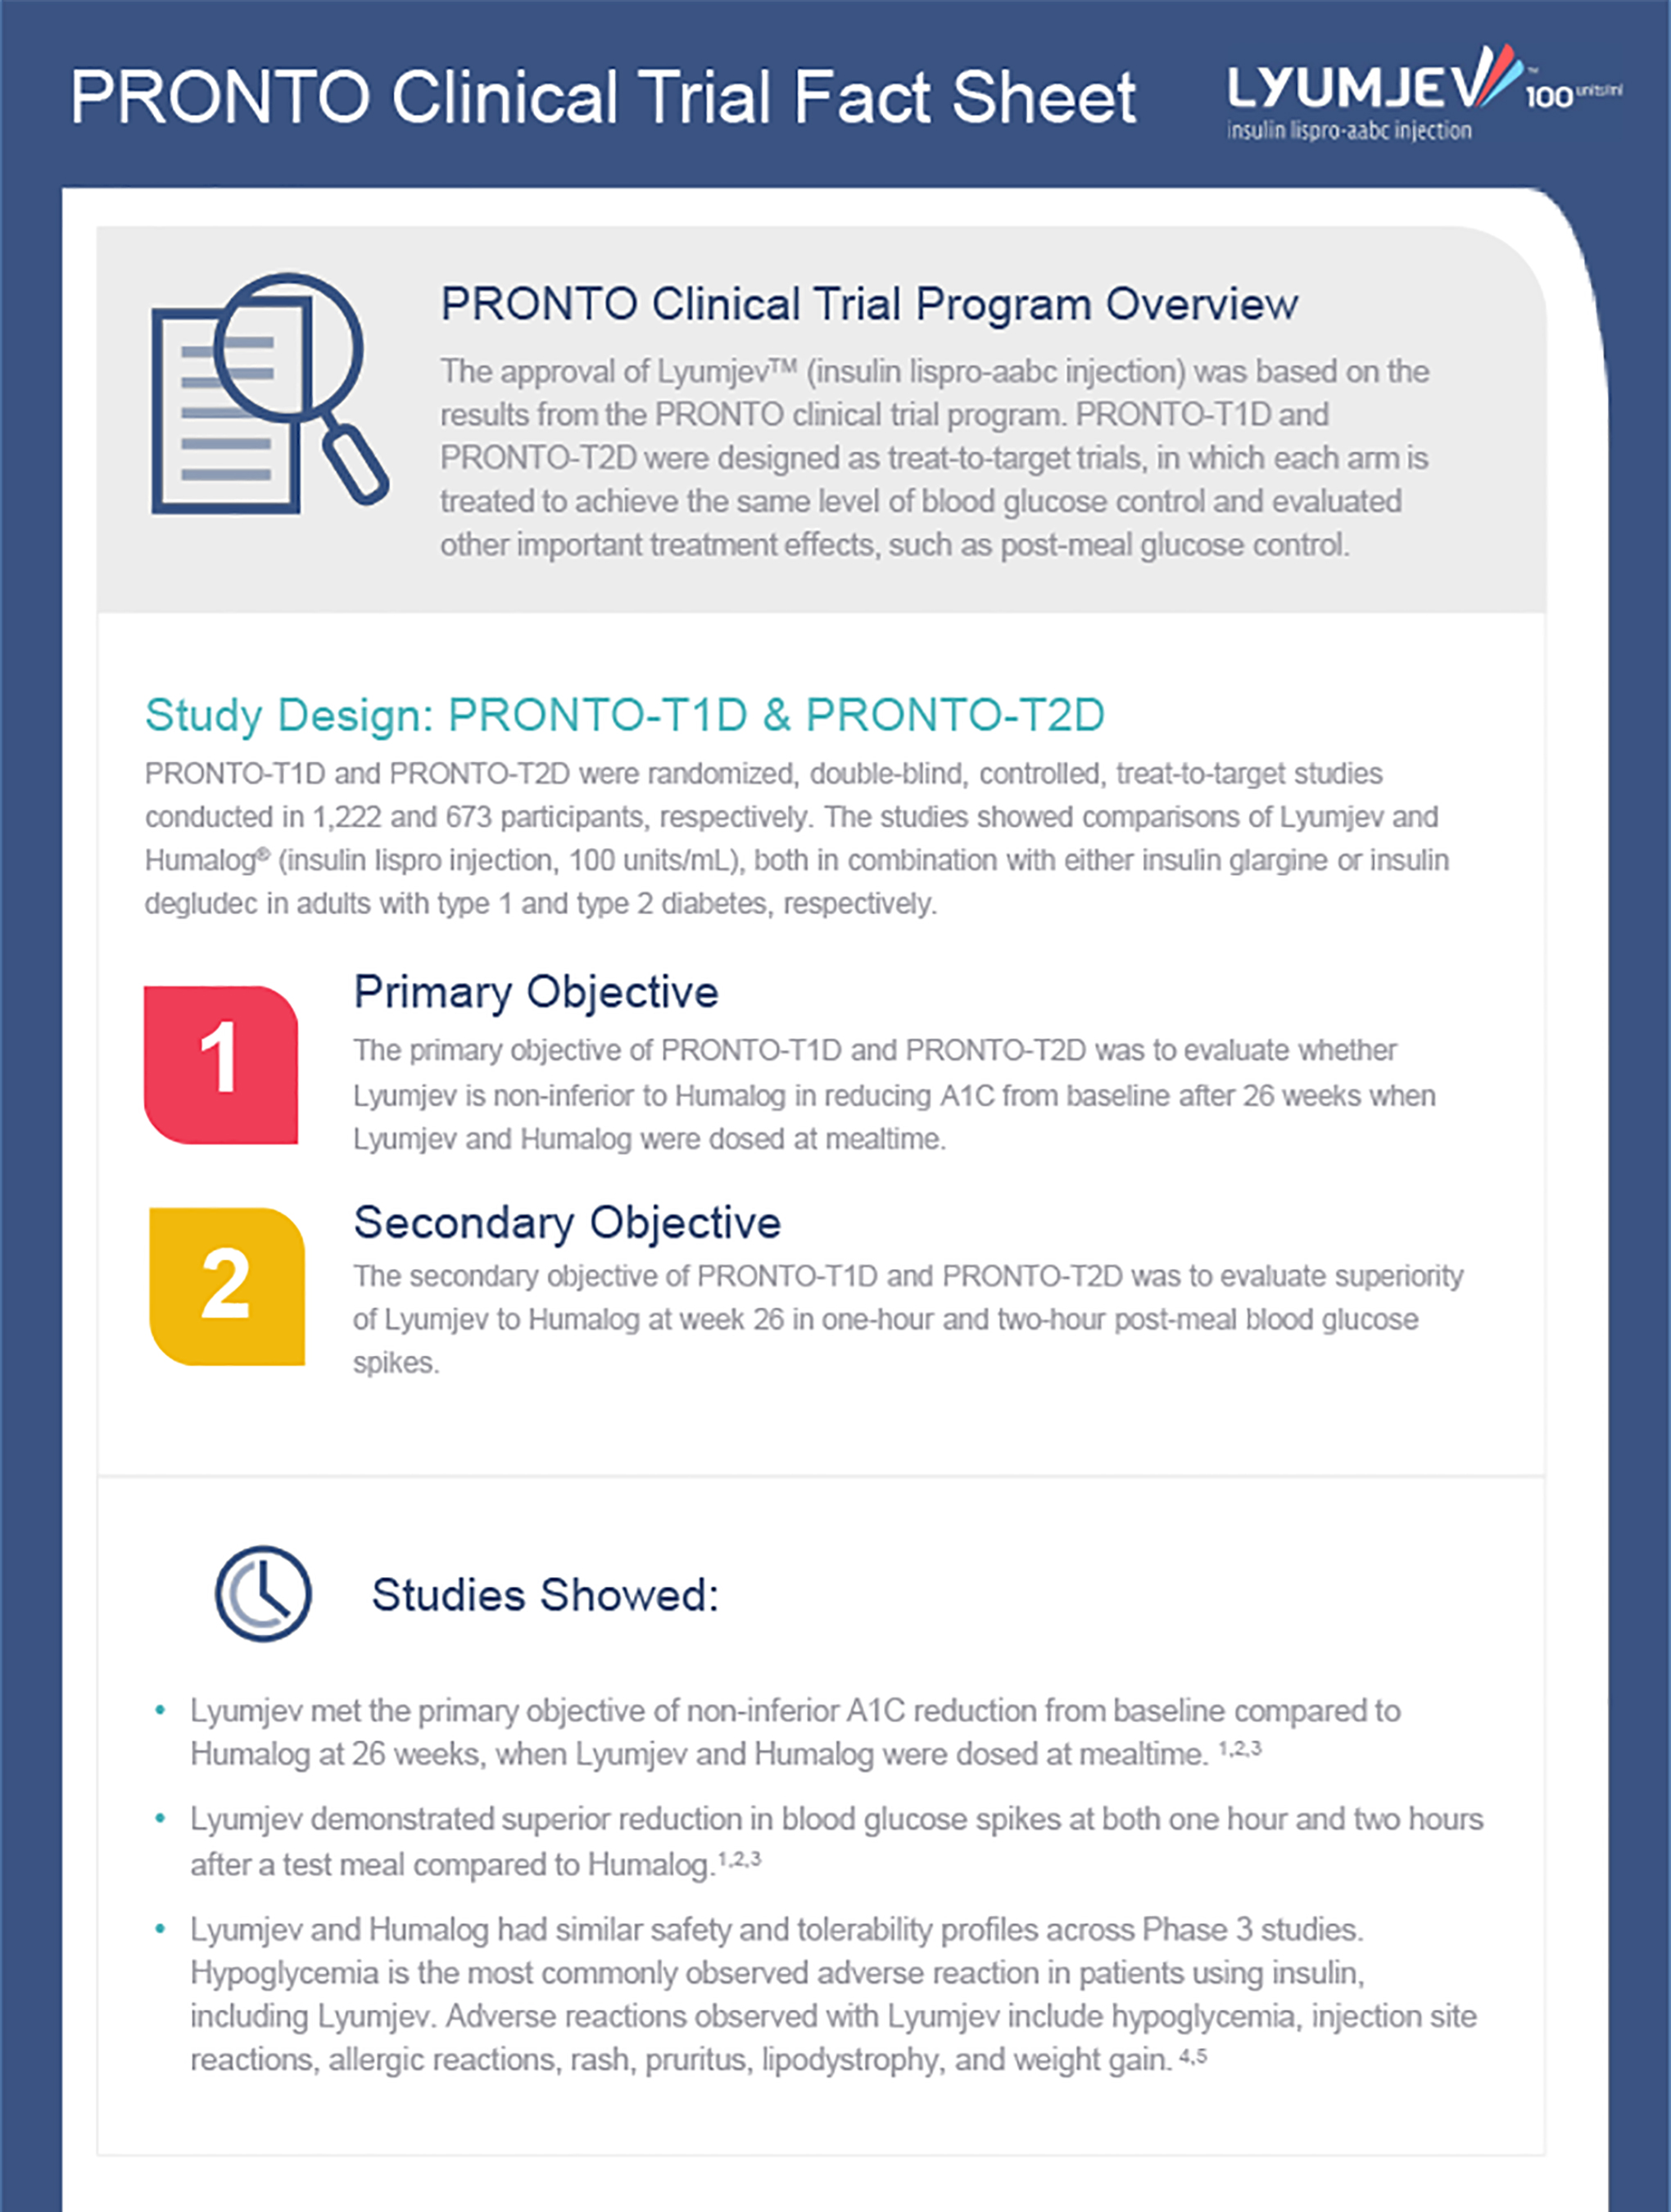 PRONTO Clinical Trail Fact Sheet